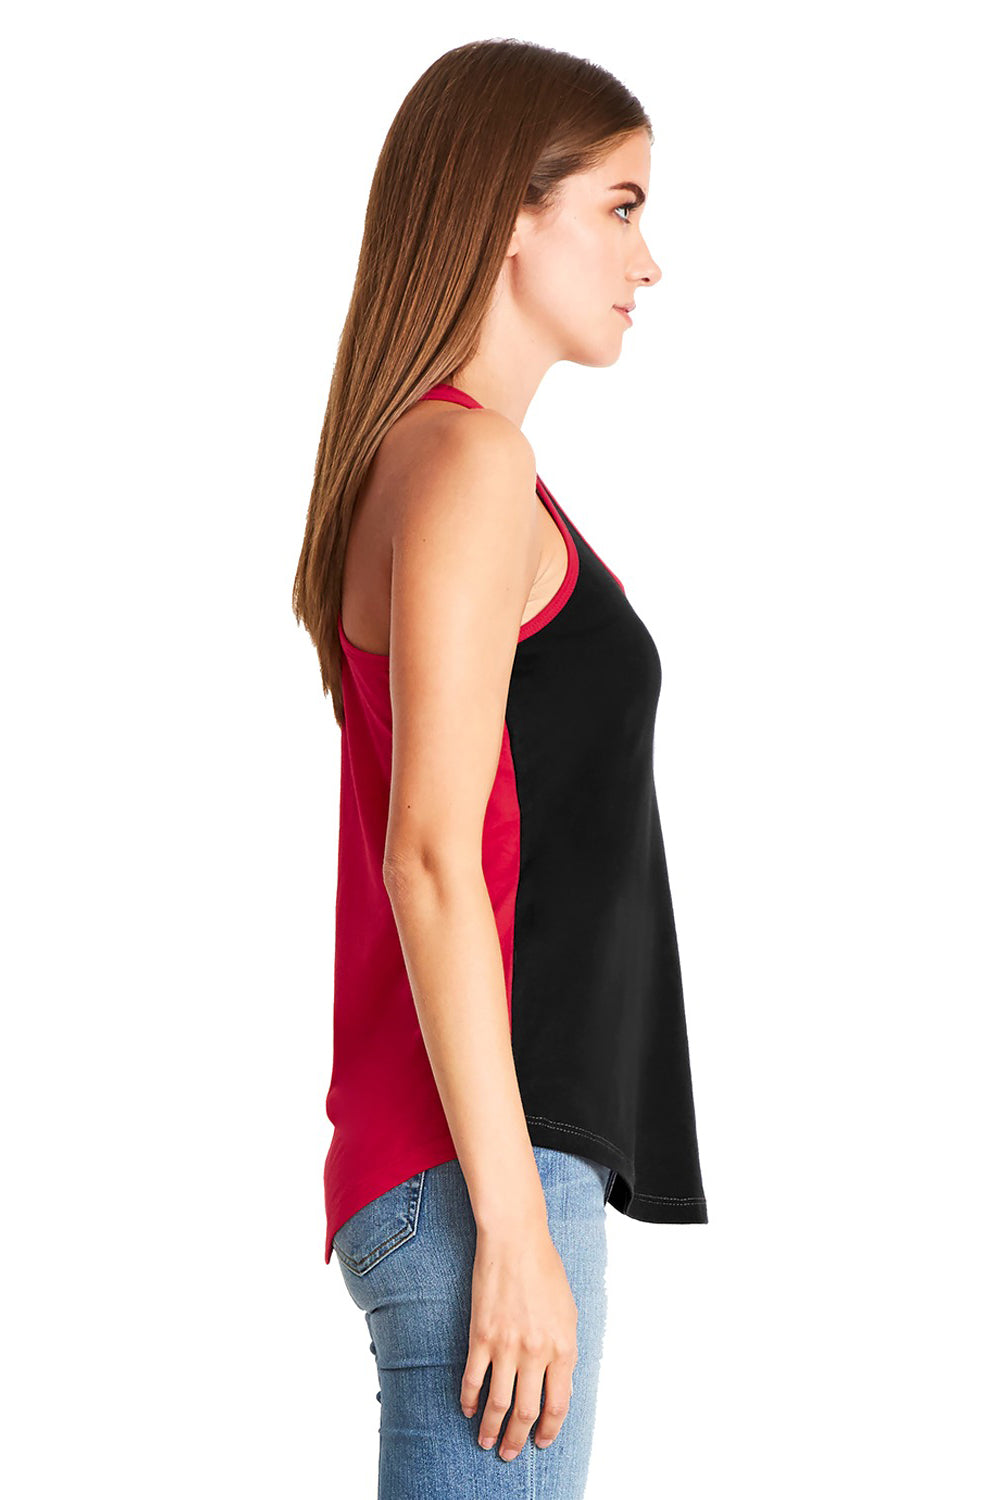 Next Level 1534 Womens Ideal Tank Top Black/Red Side